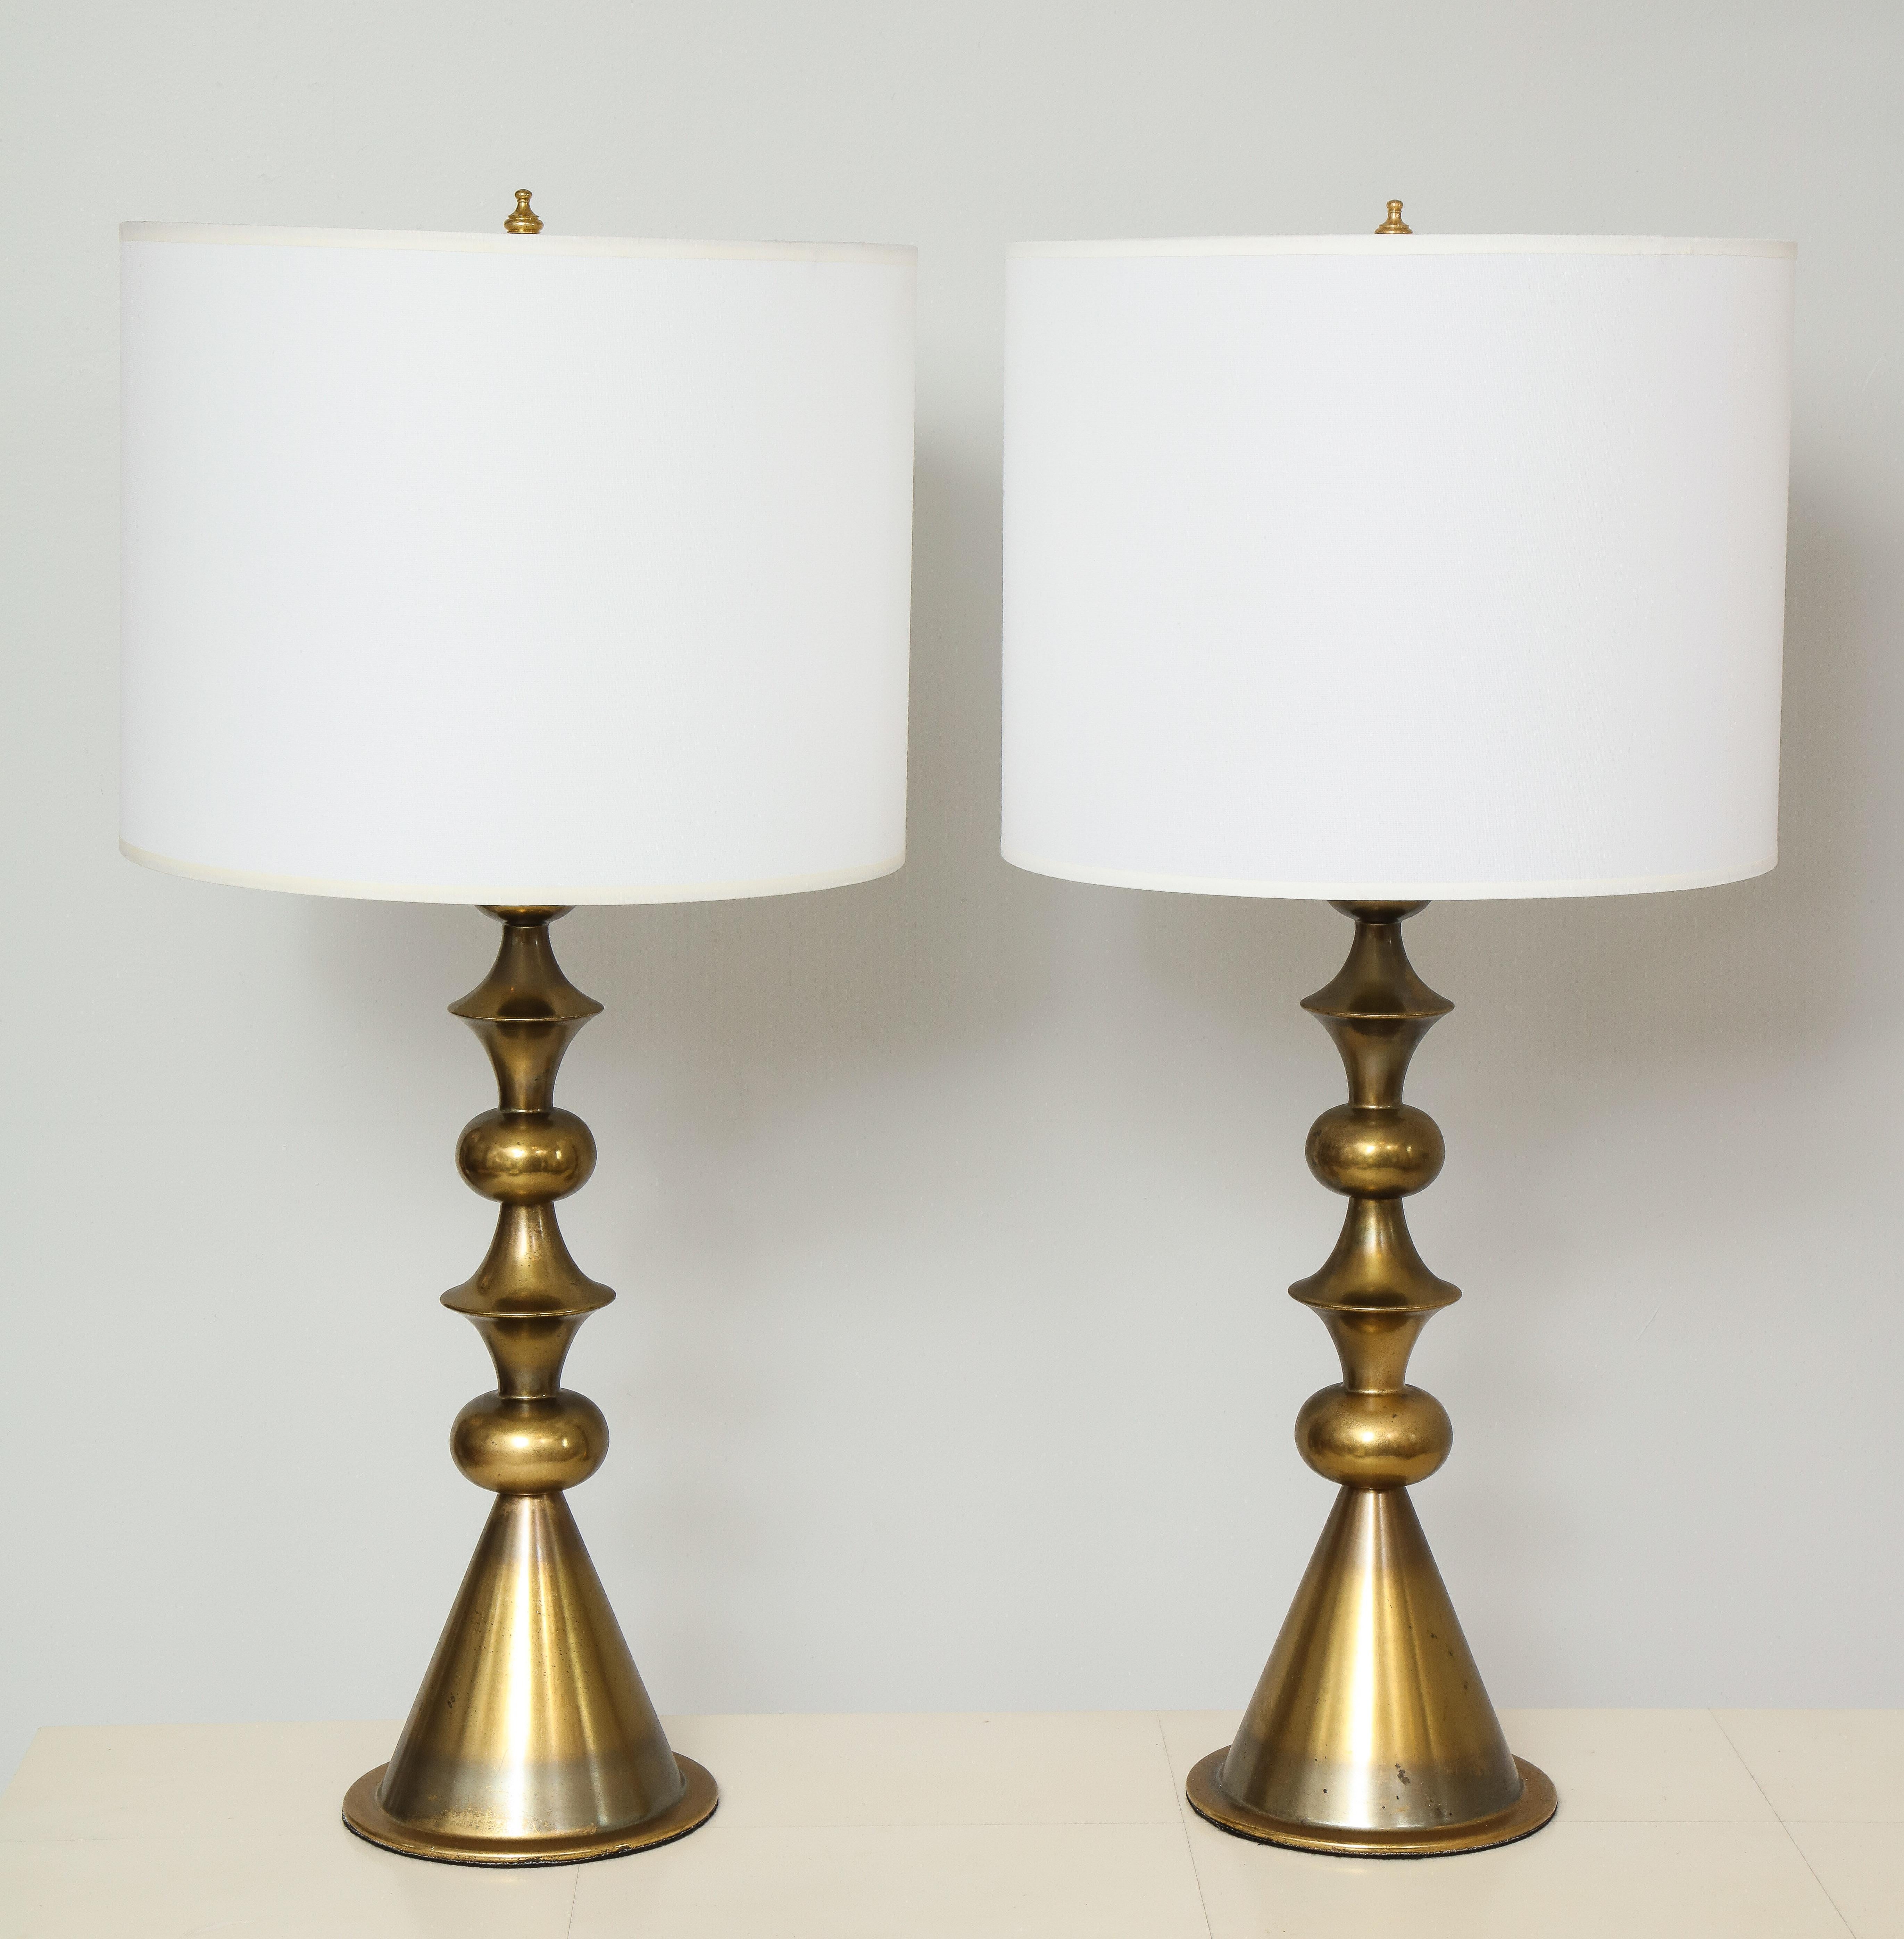 Pair of Mid-Century Modern brass table lamps in the manner of Tommi Parzinger.